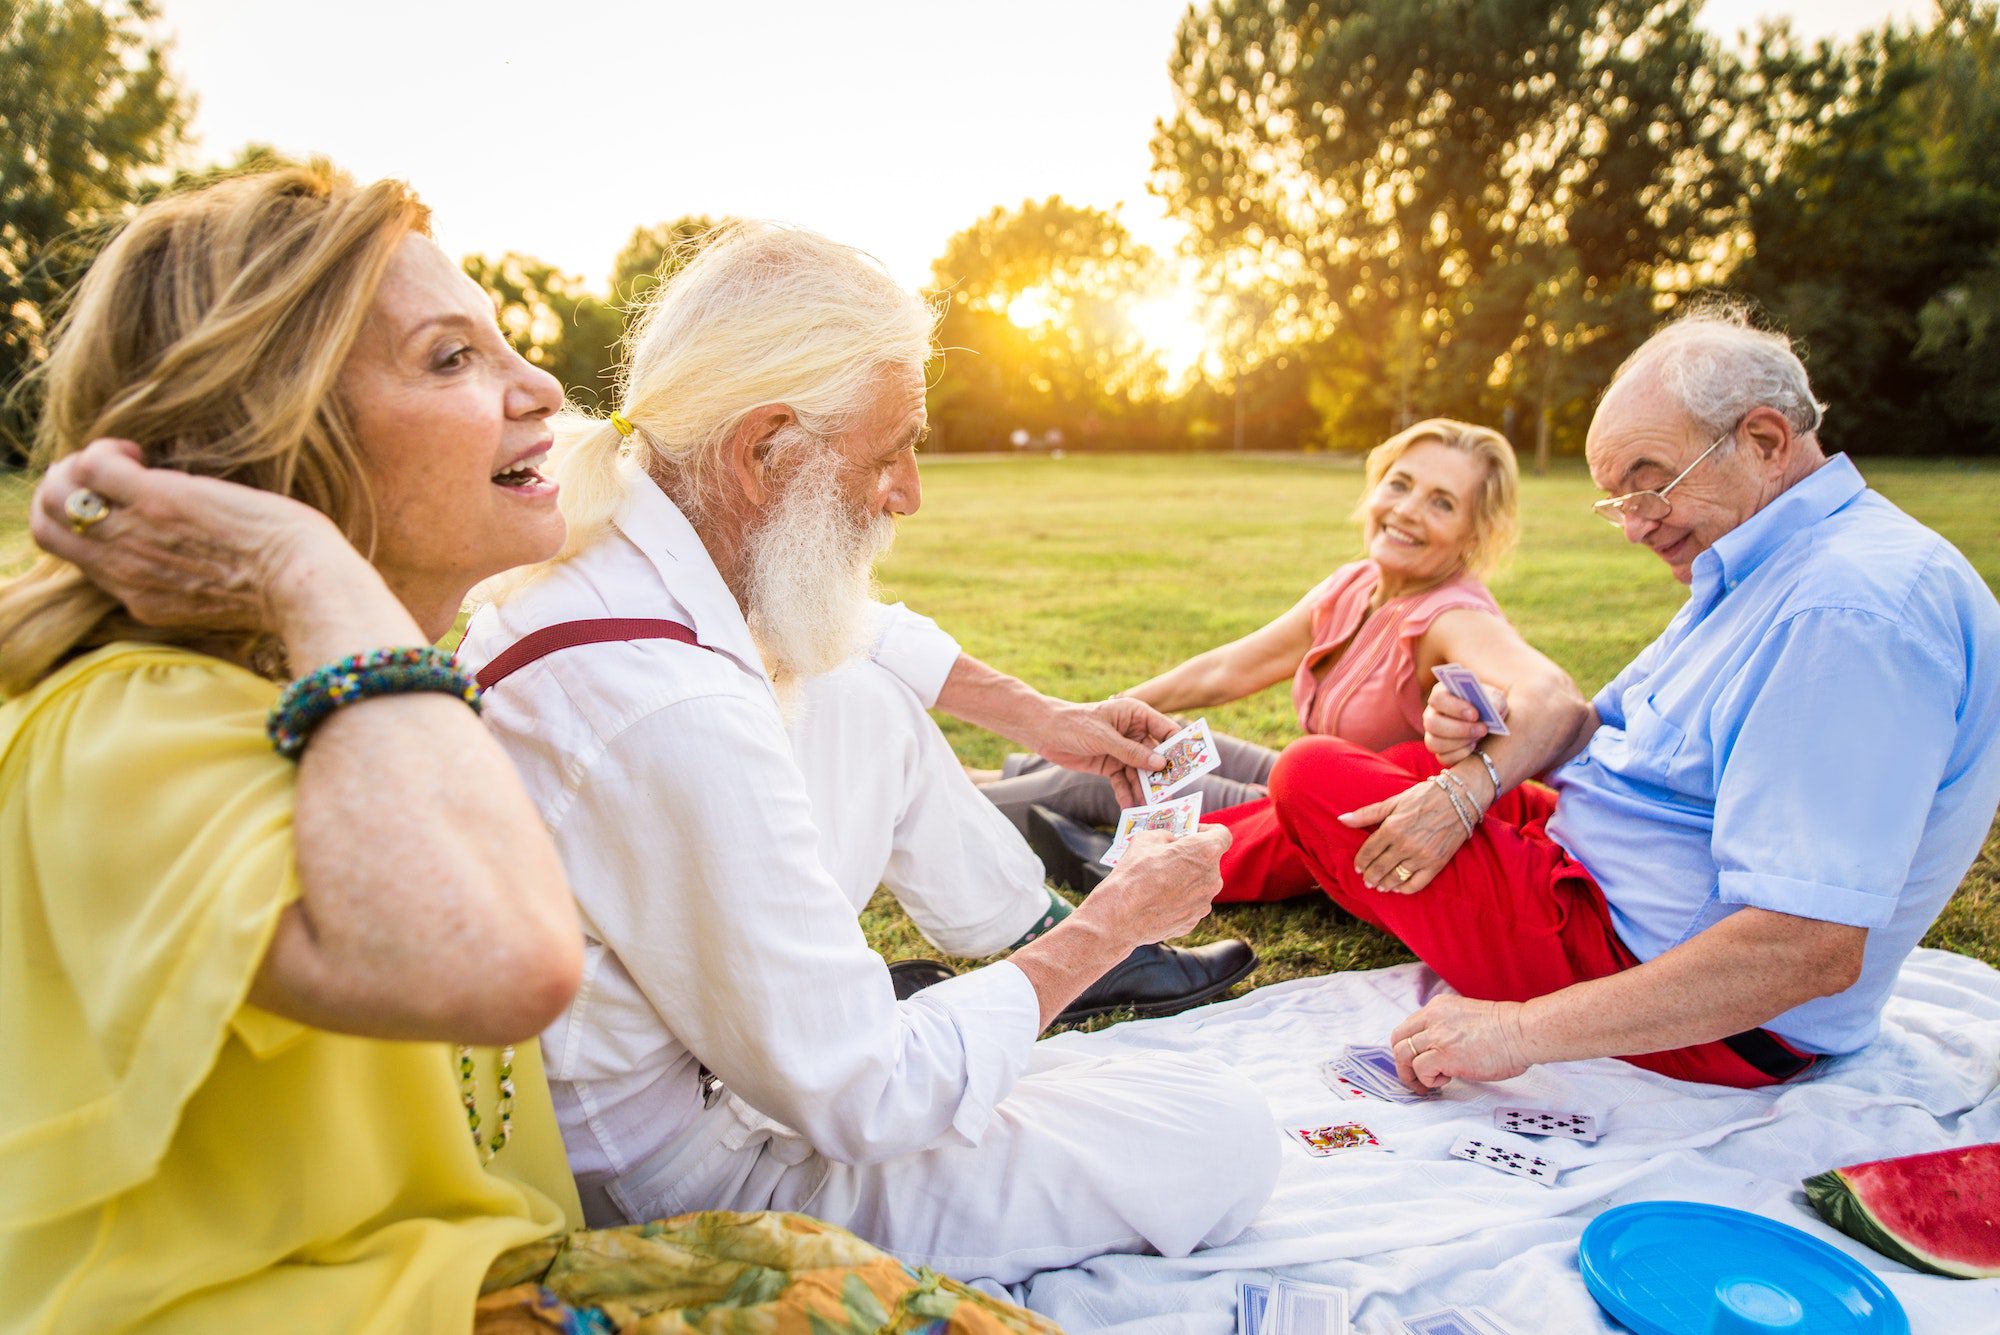 Group of senior people bonding outdoors with Medicare